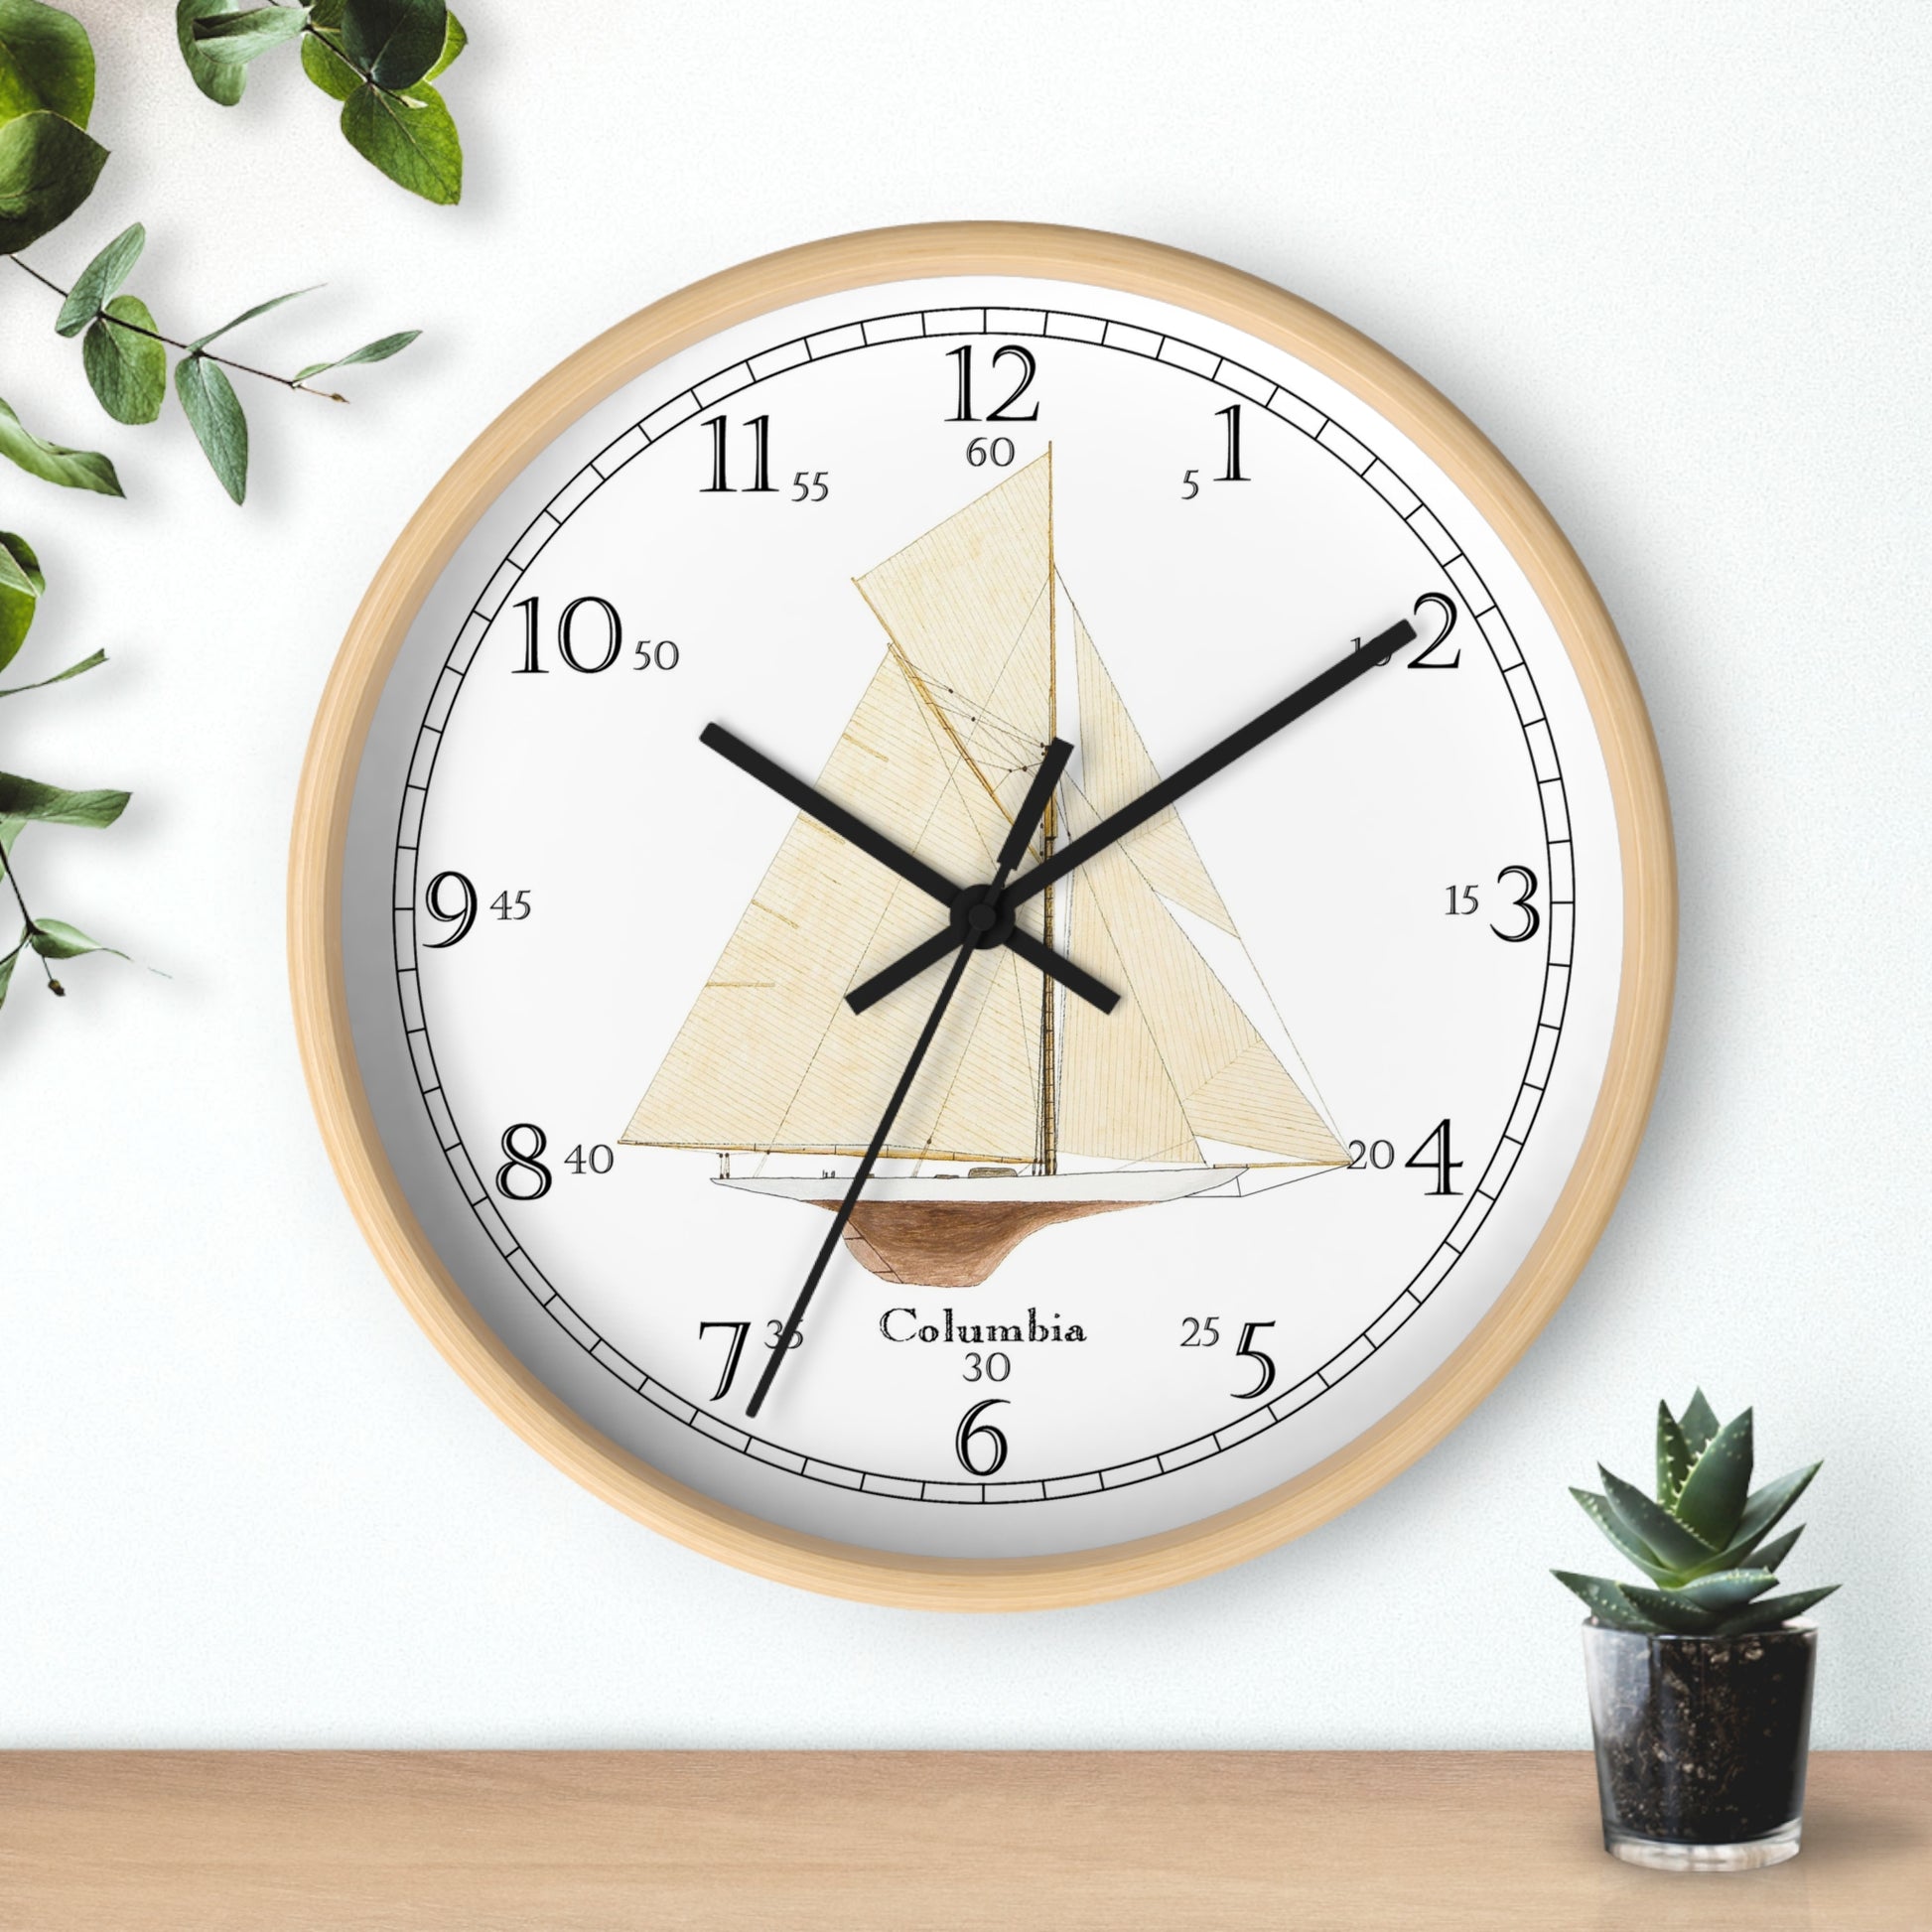 The Columbia English Numeral Clock will add a special   touch to any room in your home. Perfect fo anyone who love sailing or naval history.